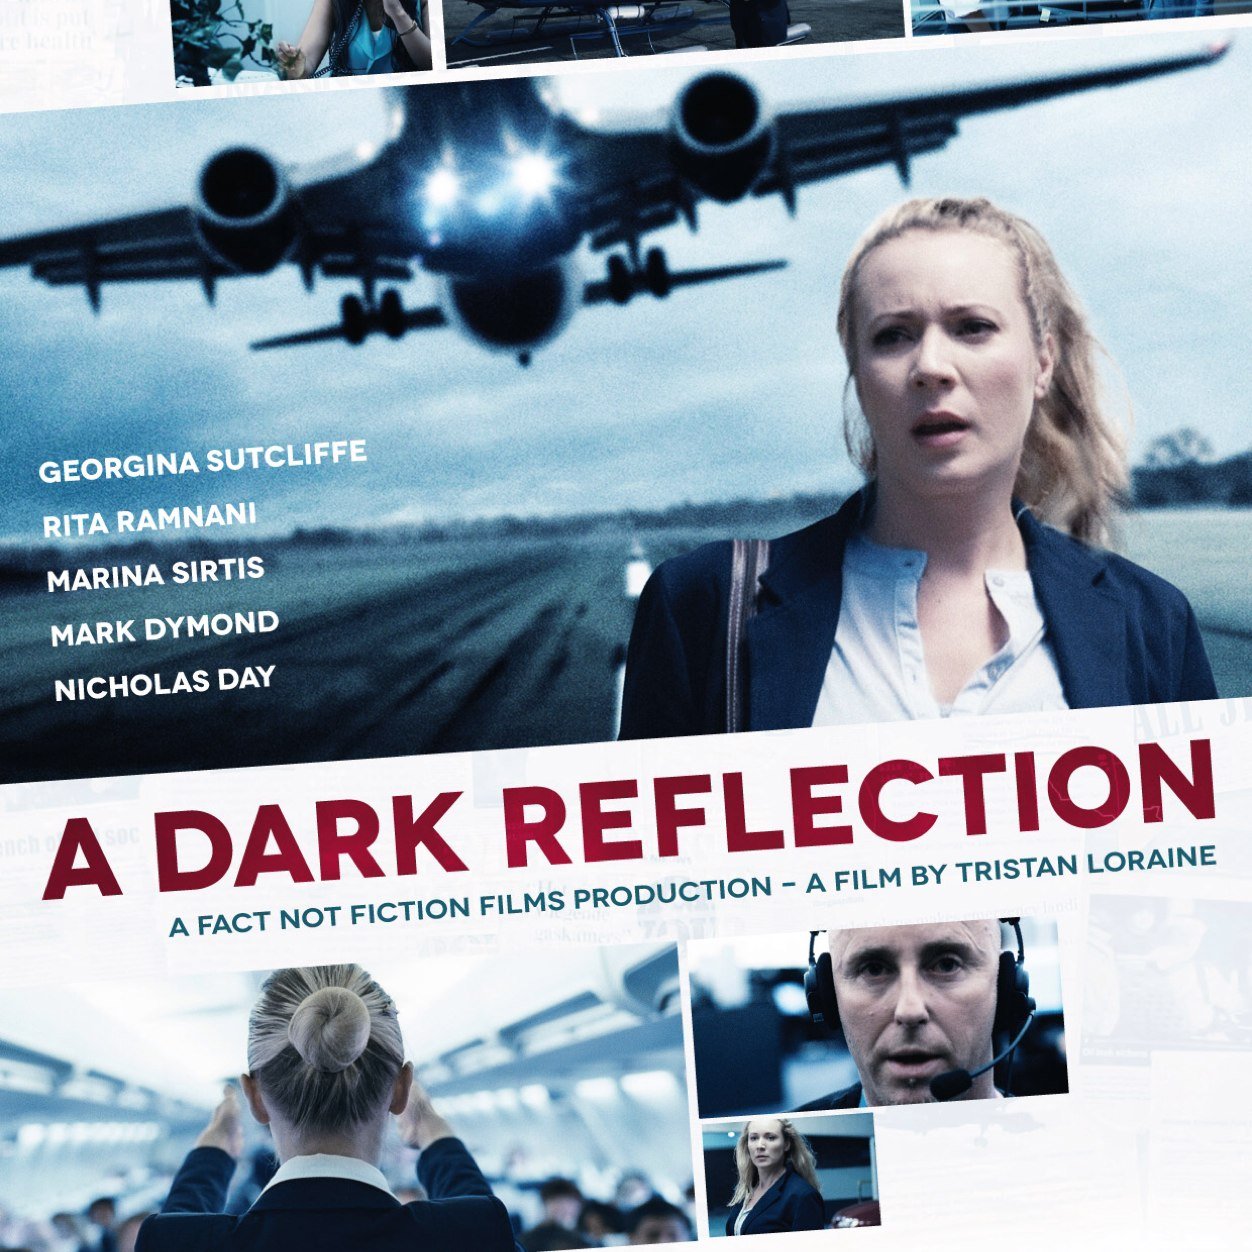 A fact based investigative thriller film. A journalist digs deep into the world of aviation and discovers some uncomfortable truths.